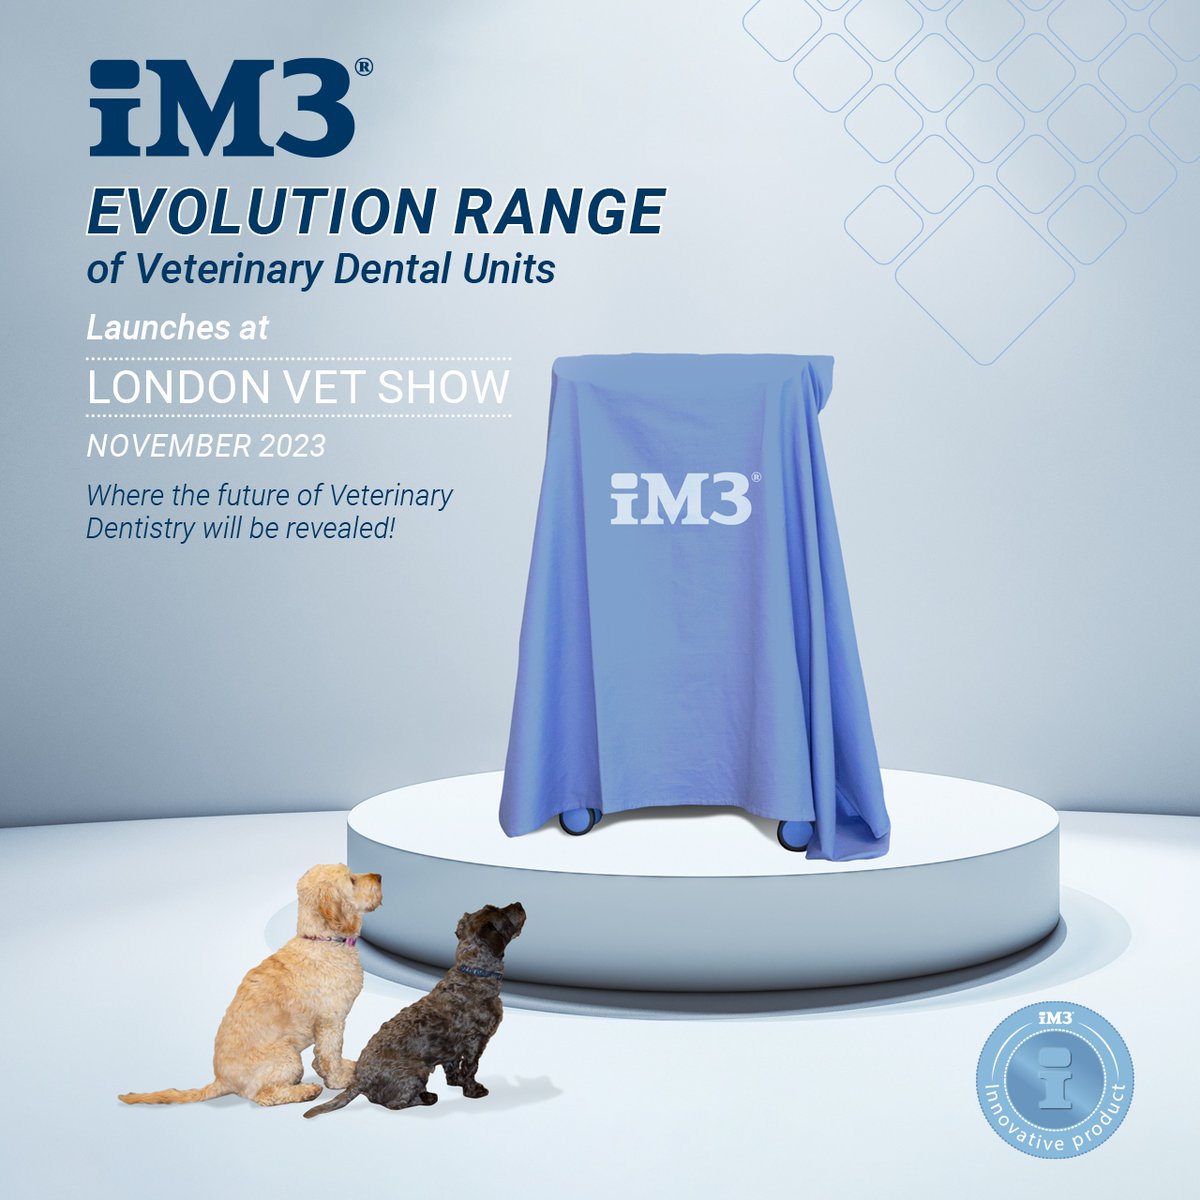 🐶We have some very exciting news from iM3 to share with you! ⁠ 🐾Introducing the Evolution Range of Veterinary Dental Units - Launching at the London Vet Show!⁠ ⁠ ⁠ 16th November 2023 - STAND K50⁠ ⁠